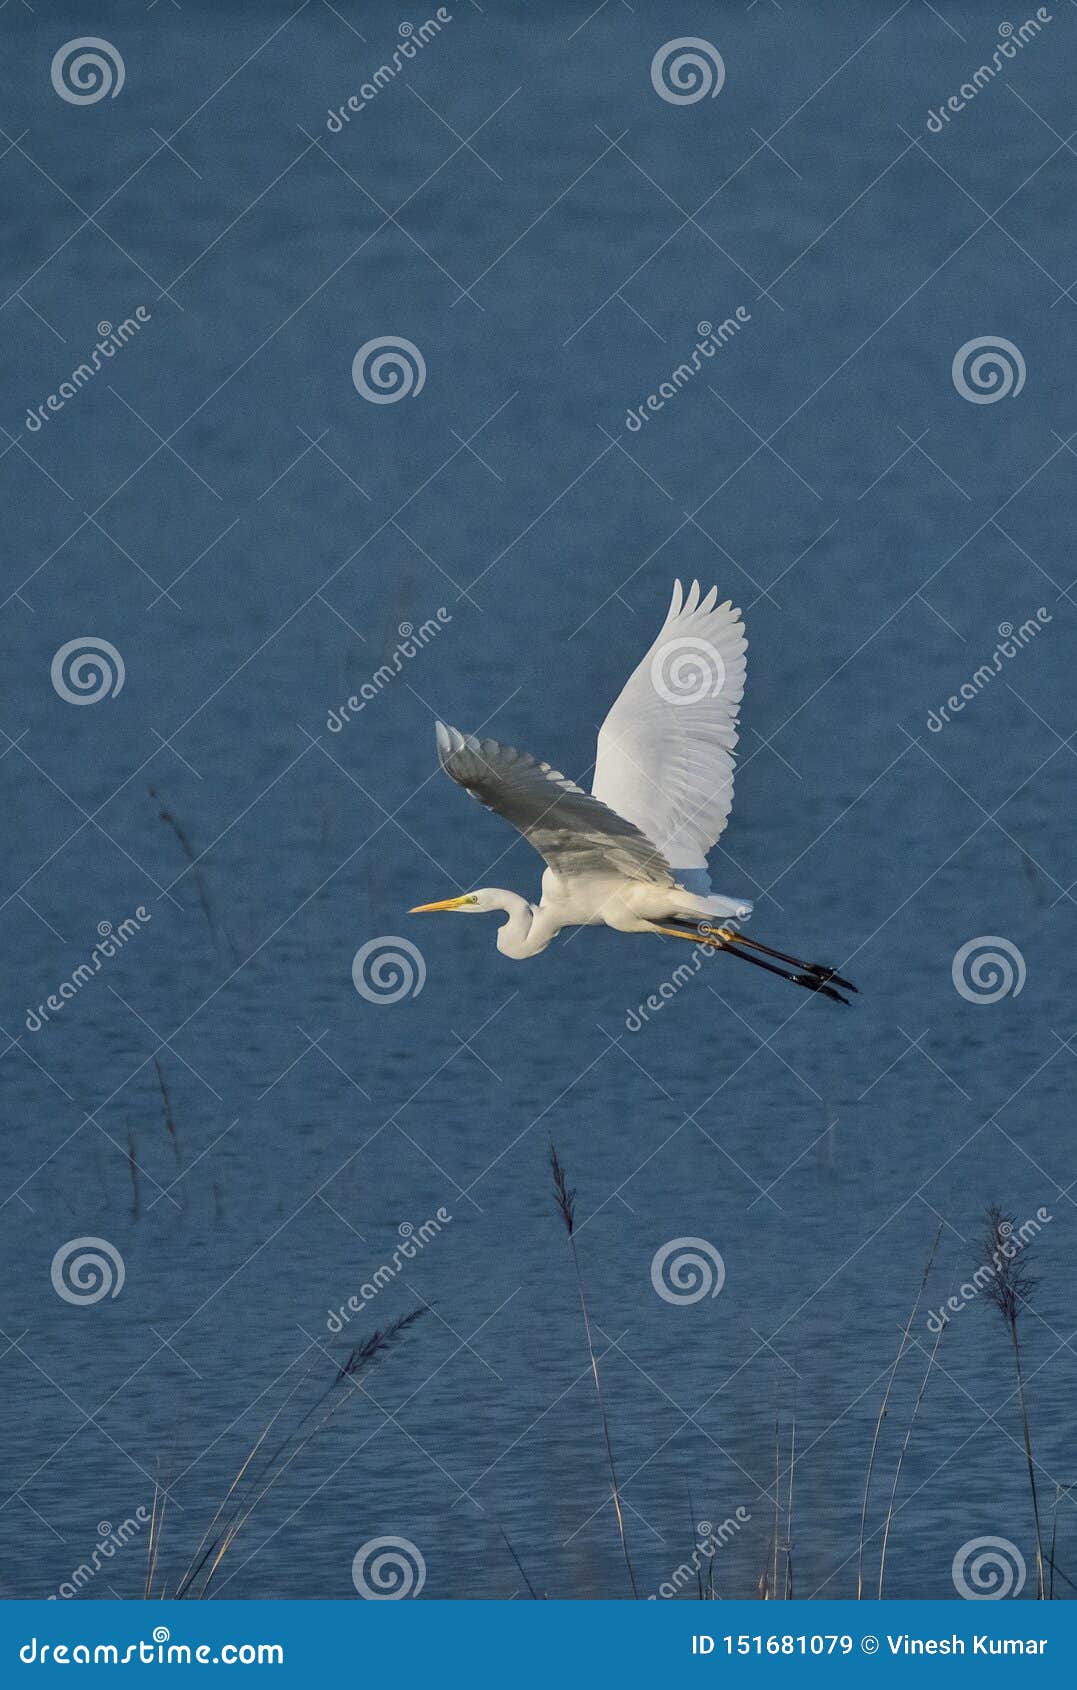 cattle egret bird flying over the ramganga rive in an indian forest